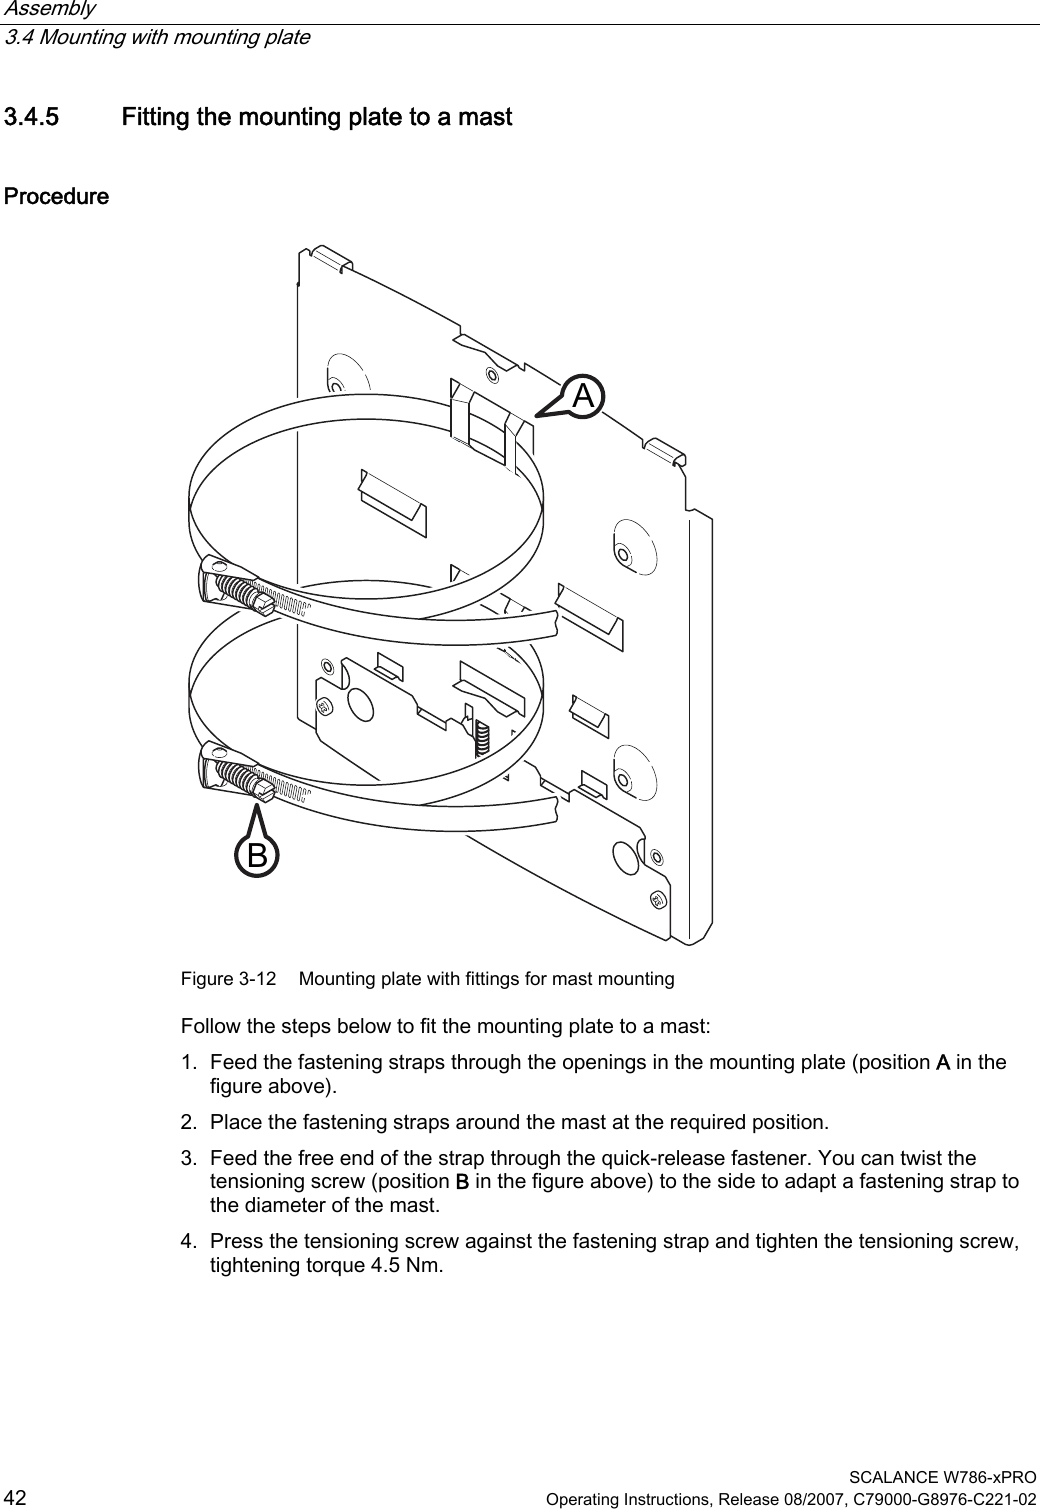 Assembly   3.4 Mounting with mounting plate  SCALANCE W786-xPRO 42  Operating Instructions, Release 08/2007, C79000-G8976-C221-02 3.4.5 Fitting the mounting plate to a mast Procedure BA Figure 3-12  Mounting plate with fittings for mast mounting Follow the steps below to fit the mounting plate to a mast: 1. Feed the fastening straps through the openings in the mounting plate (position A in the figure above). 2. Place the fastening straps around the mast at the required position. 3. Feed the free end of the strap through the quick-release fastener. You can twist the tensioning screw (position B in the figure above) to the side to adapt a fastening strap to the diameter of the mast. 4. Press the tensioning screw against the fastening strap and tighten the tensioning screw, tightening torque 4.5 Nm. 